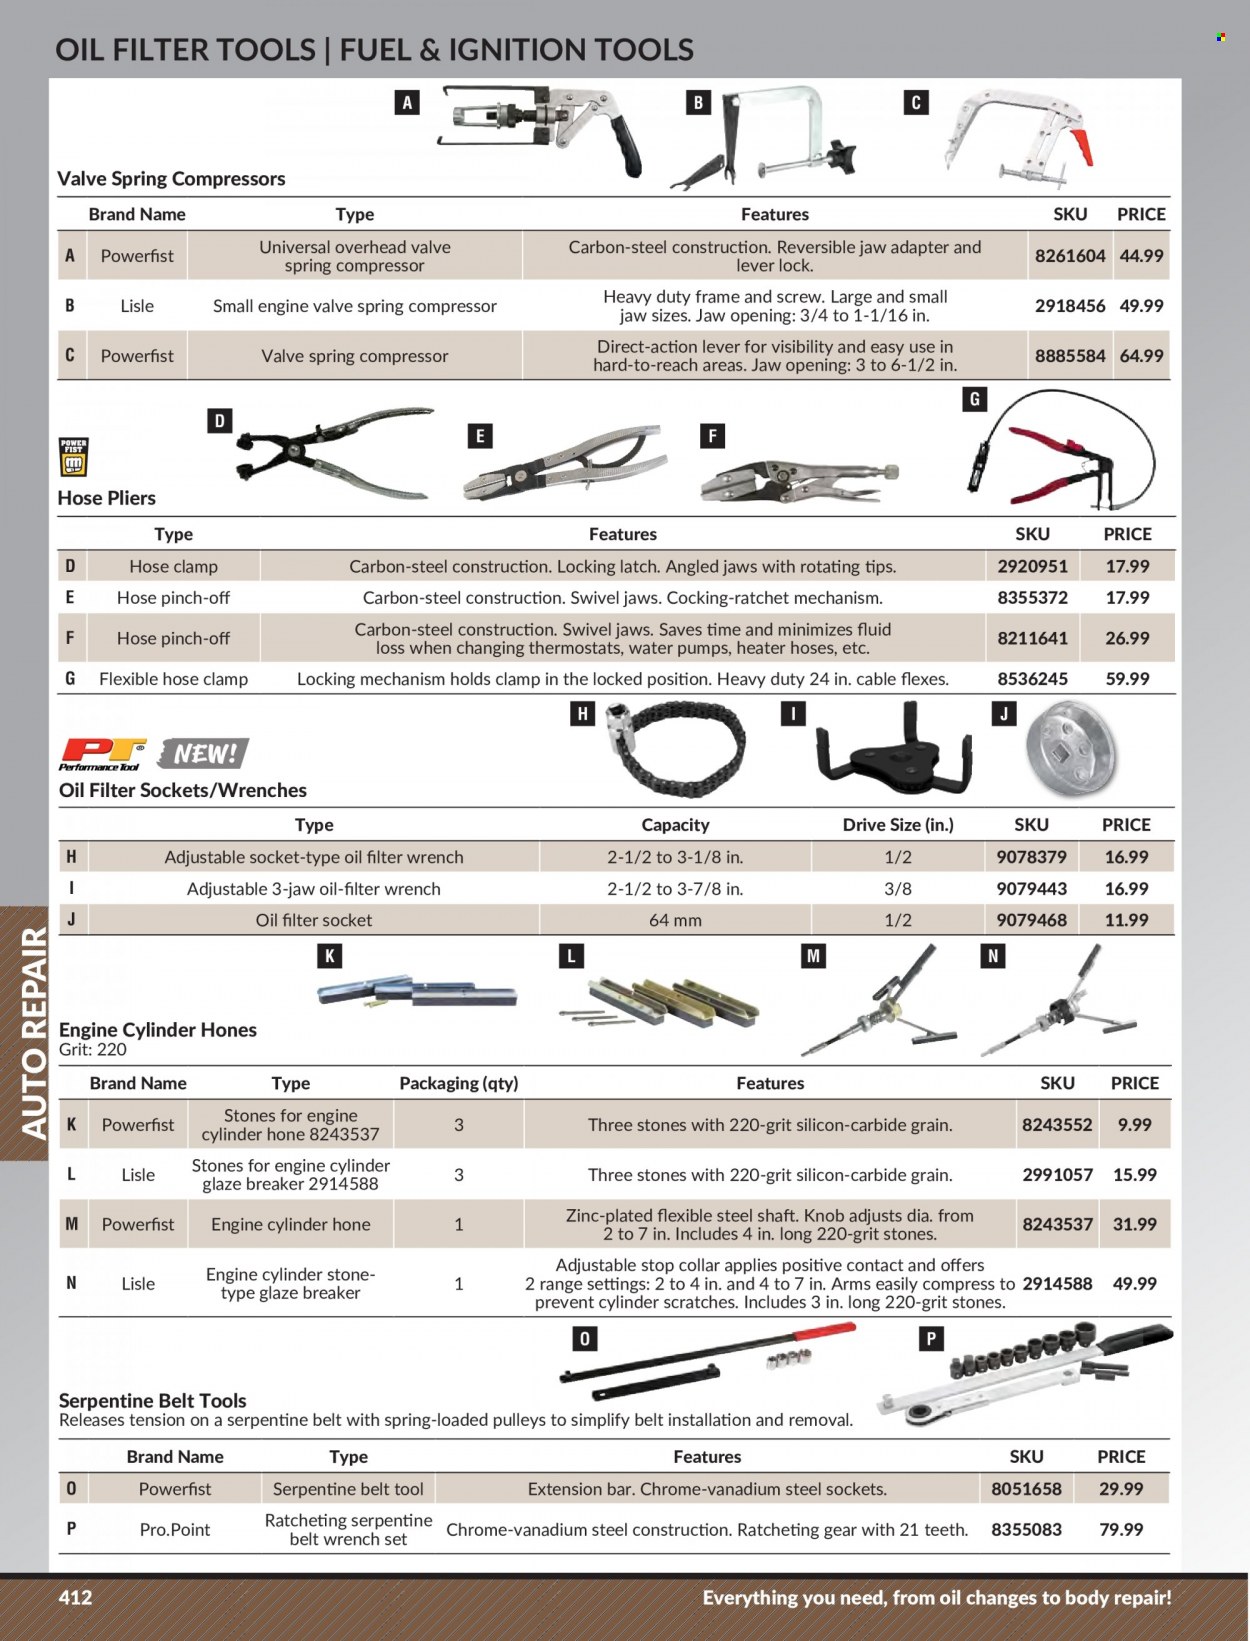 thumbnail - Princess Auto Flyer - Sales products - water pump, socket, heater, wrench, pliers, wrench set, hand tools, air compressor, belt, oil filter, serpentine belt, compressor. Page 420.